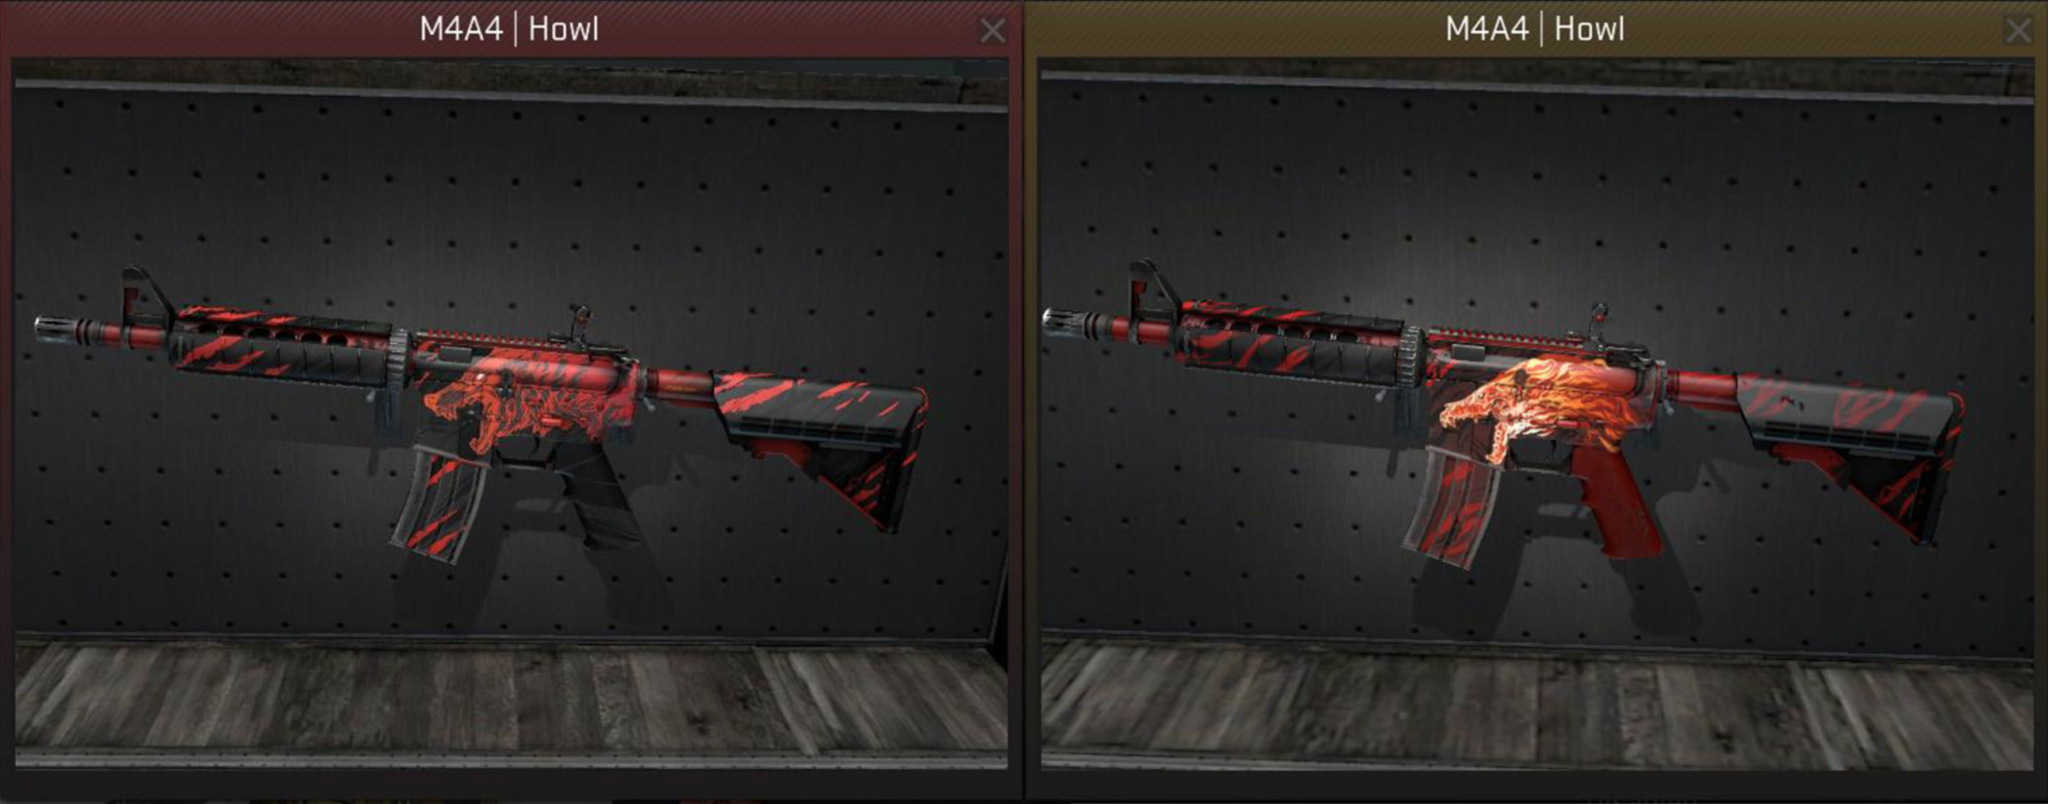 M4A4 Howling Dawn and Howl